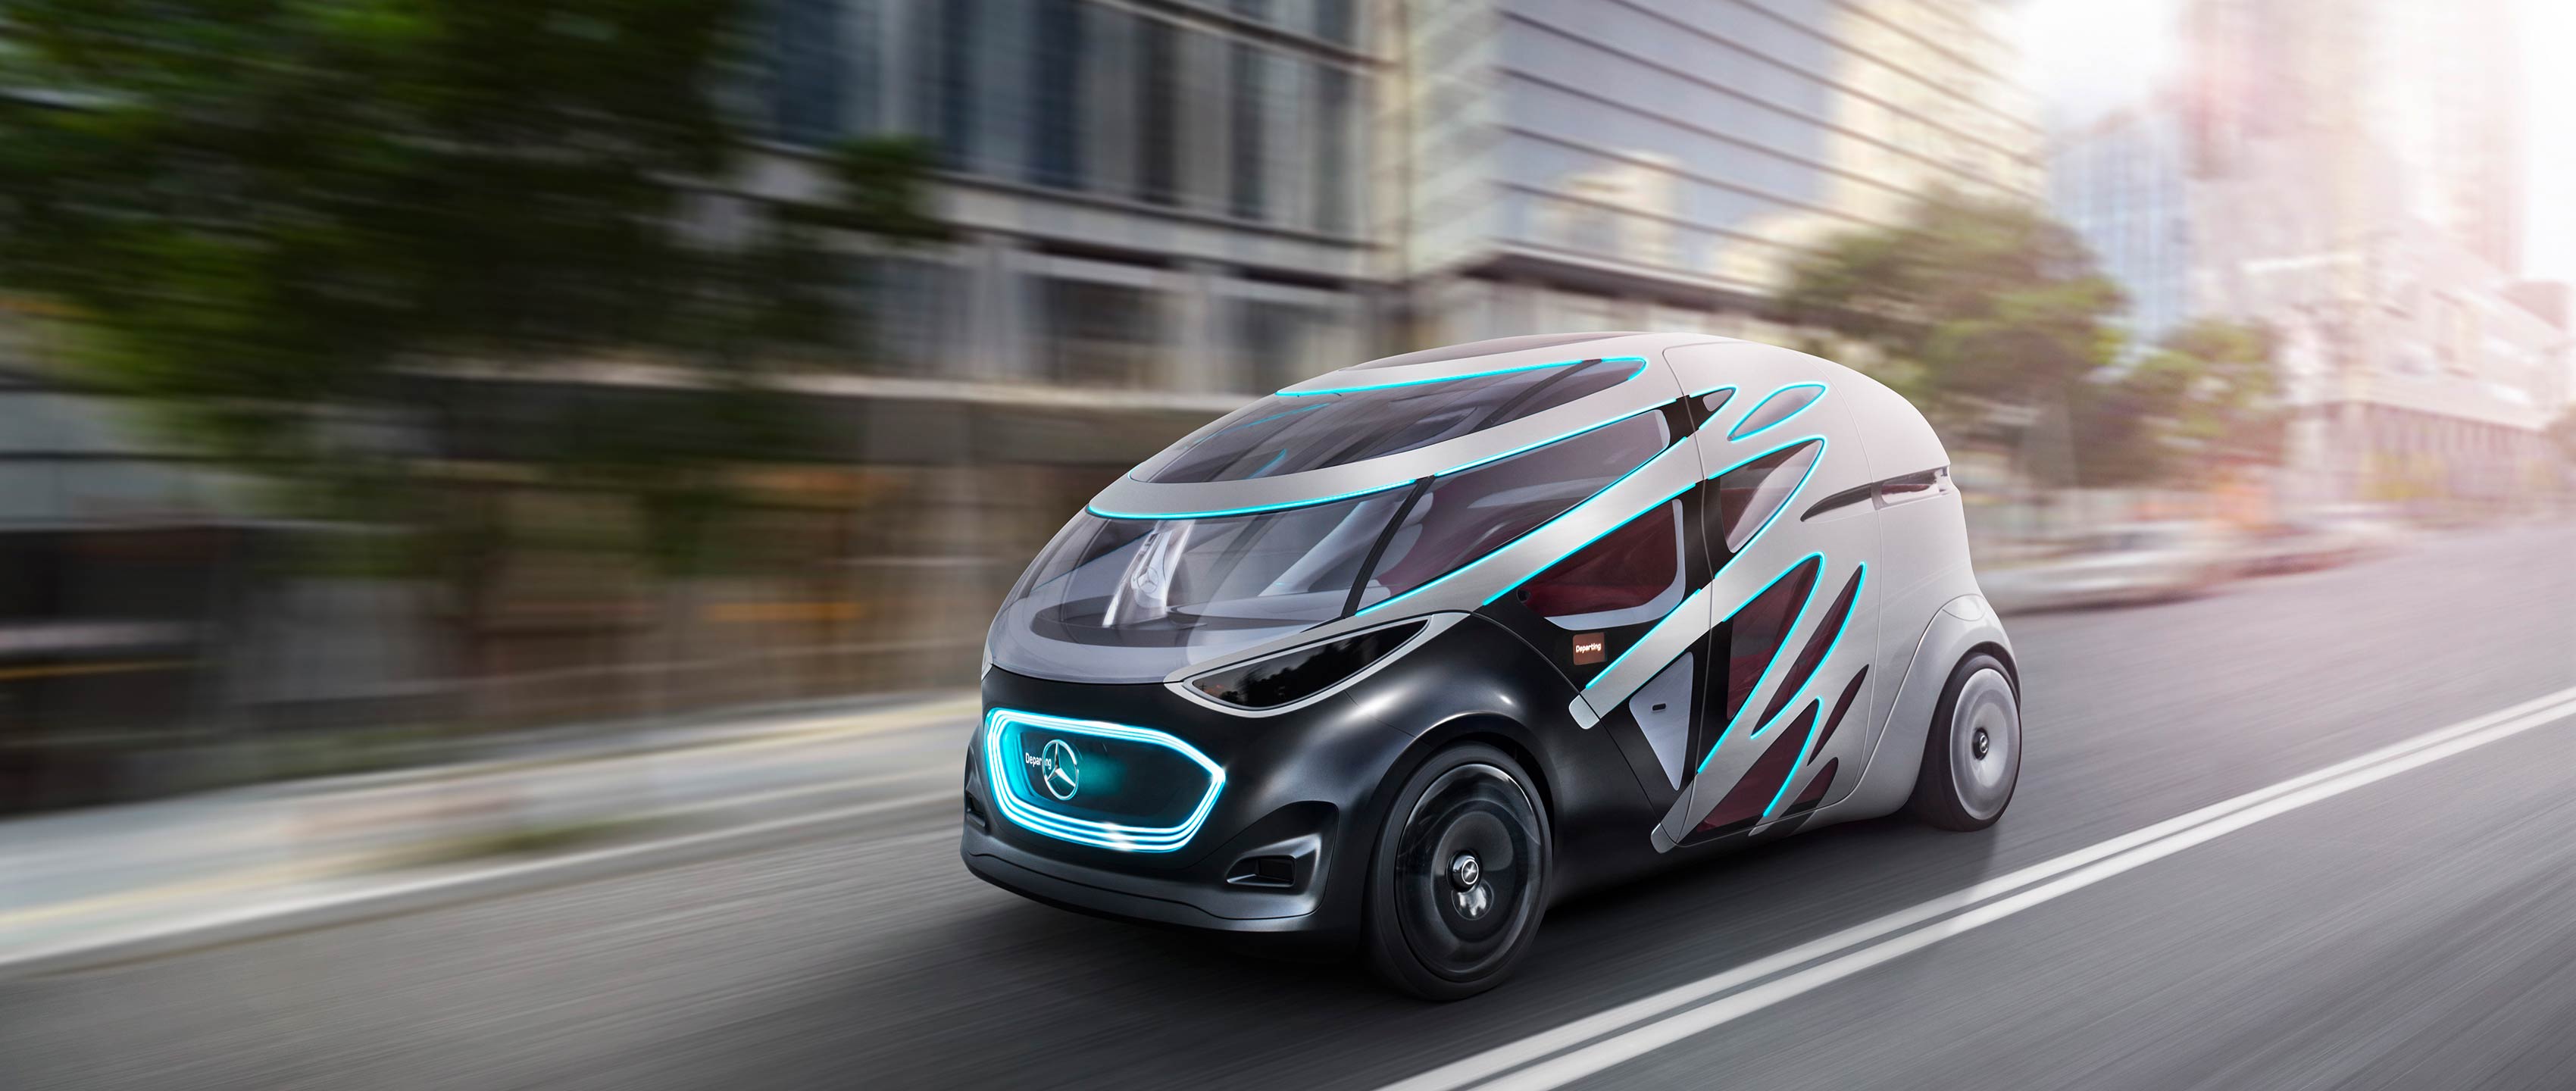 Mercedes-Benz' changing "Vision Urbanetic" car concept.